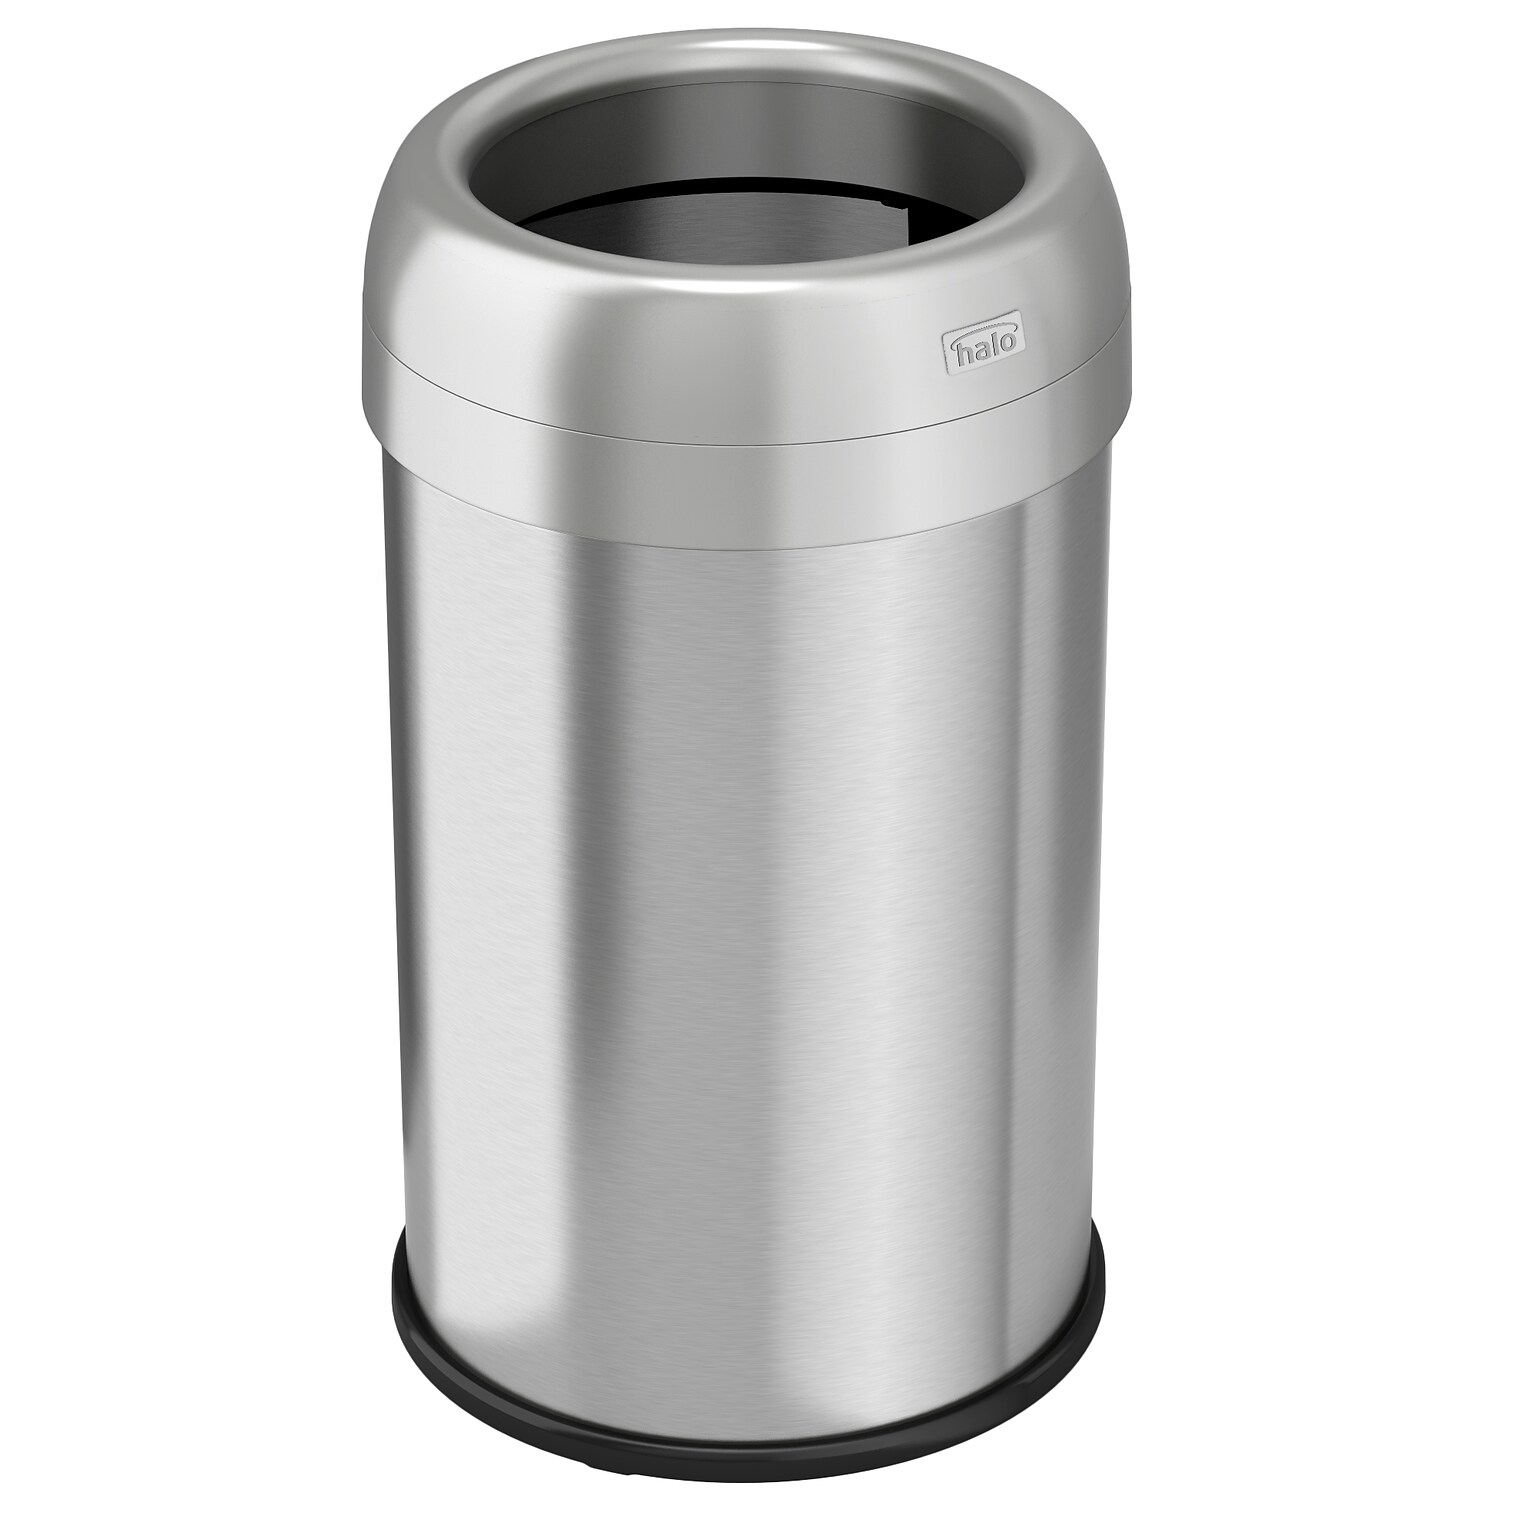 halo Stainless Steel Round Open Top Trash Can with Dual AbsorbX Odor Control System, Silver, Silver, 13 Gal. (OT13STR)